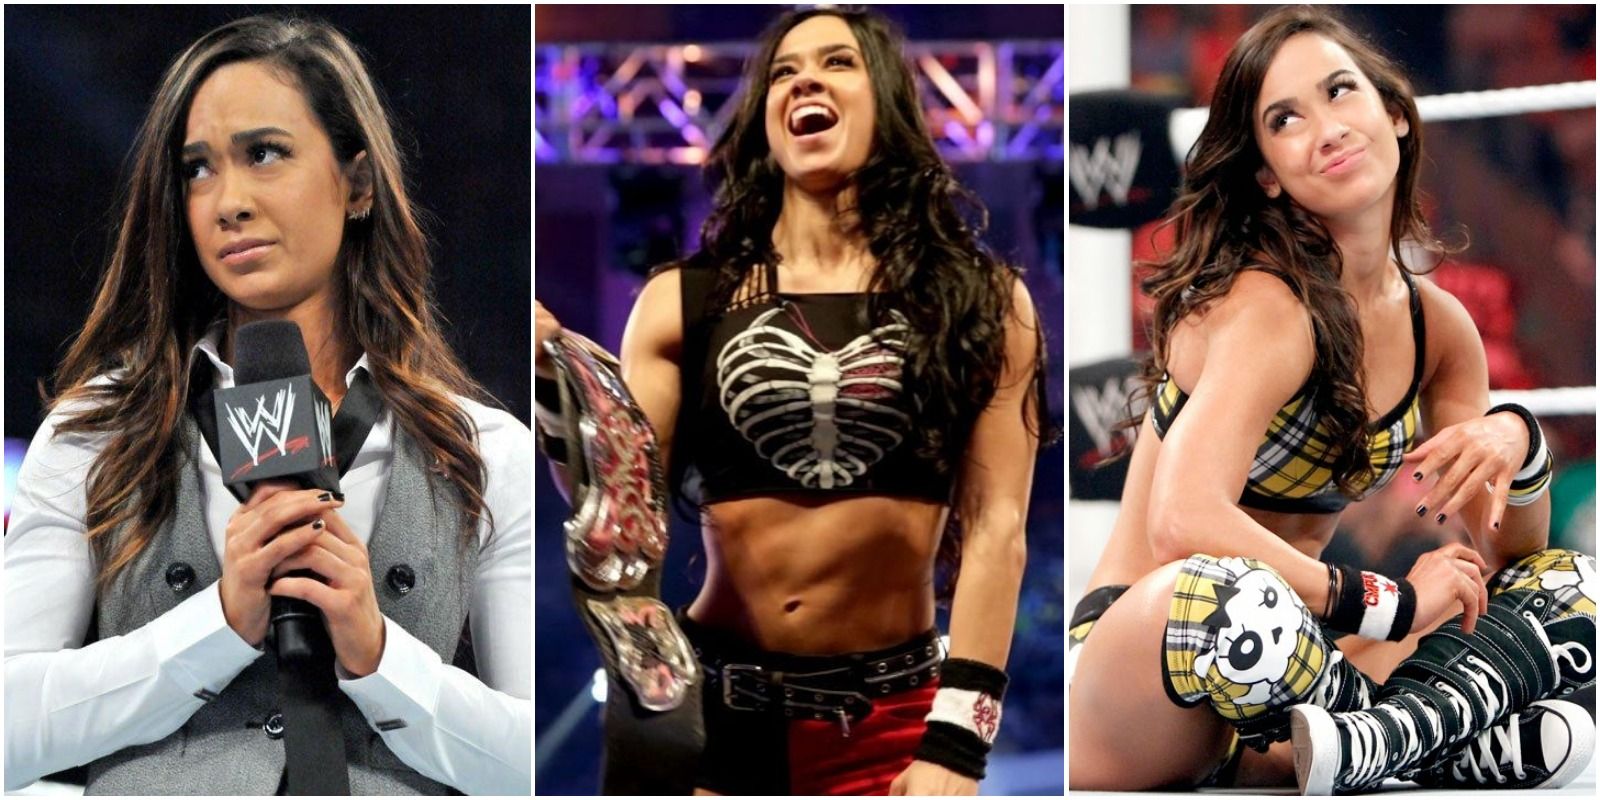 Every Version Of AJ Lee, Ranked From Worst To Best